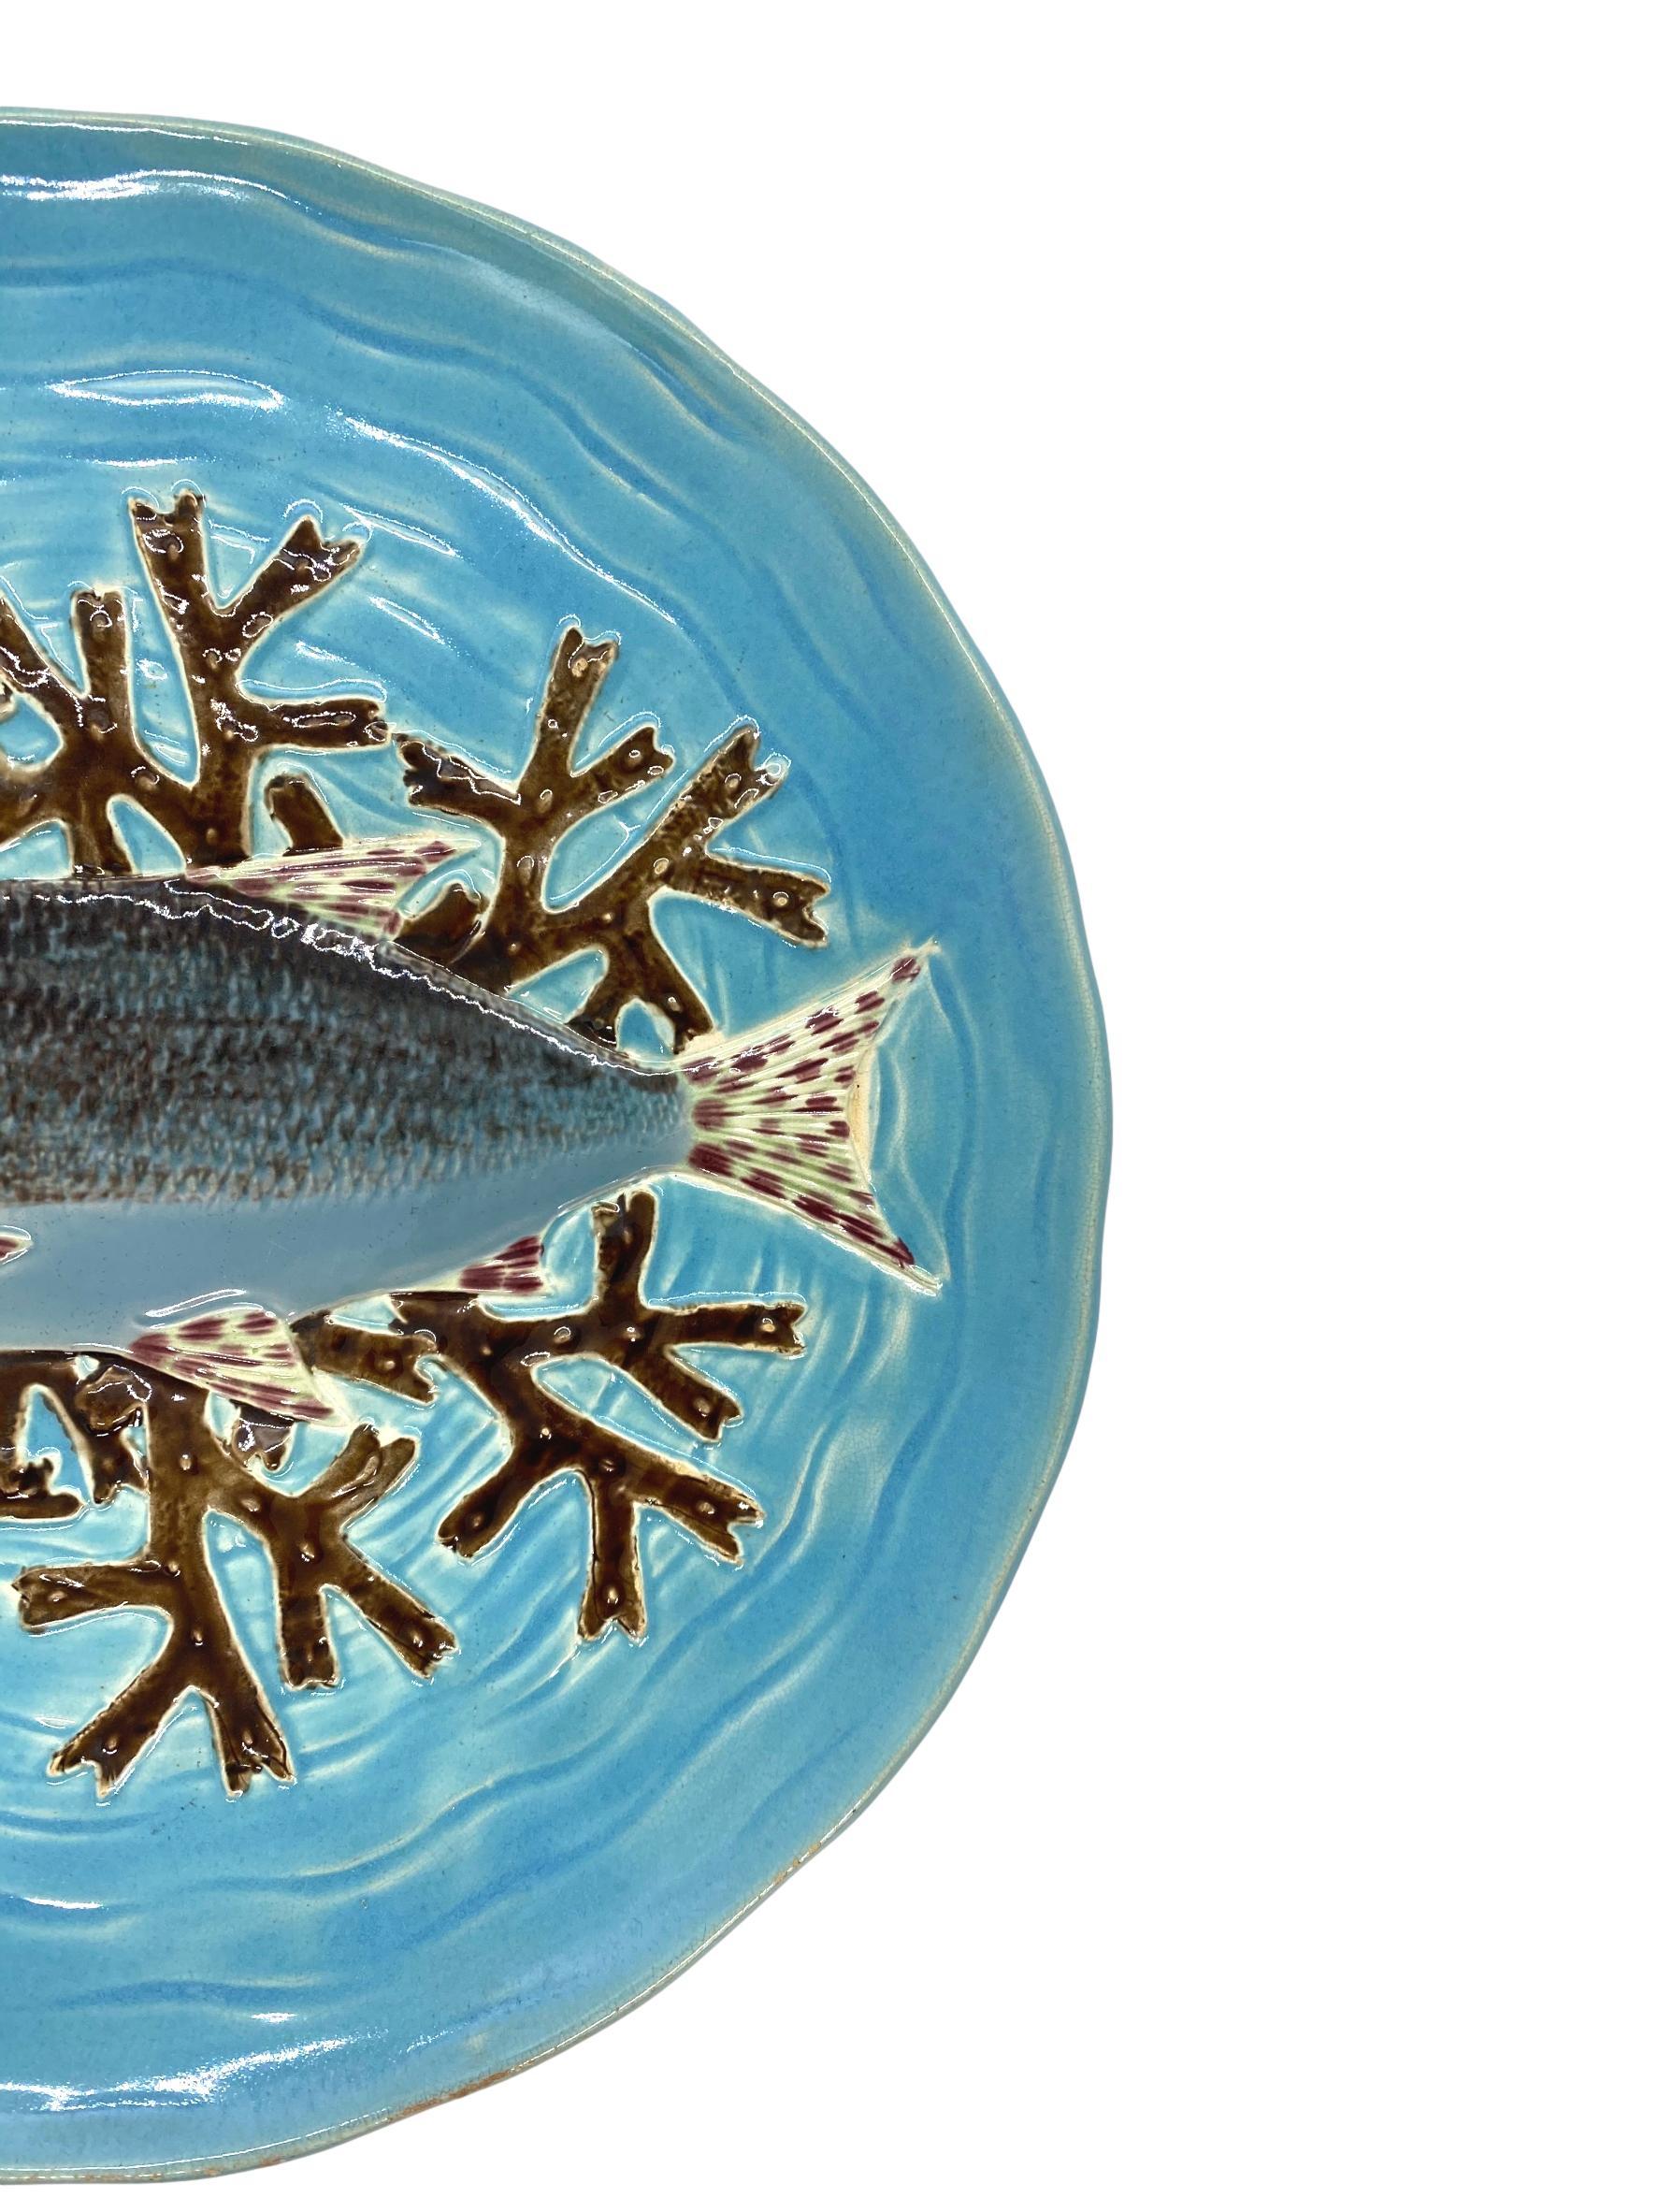 Molded J. Holdcroft Majolica Salmon Plate, Turquoise Ground, English, ca. 1875